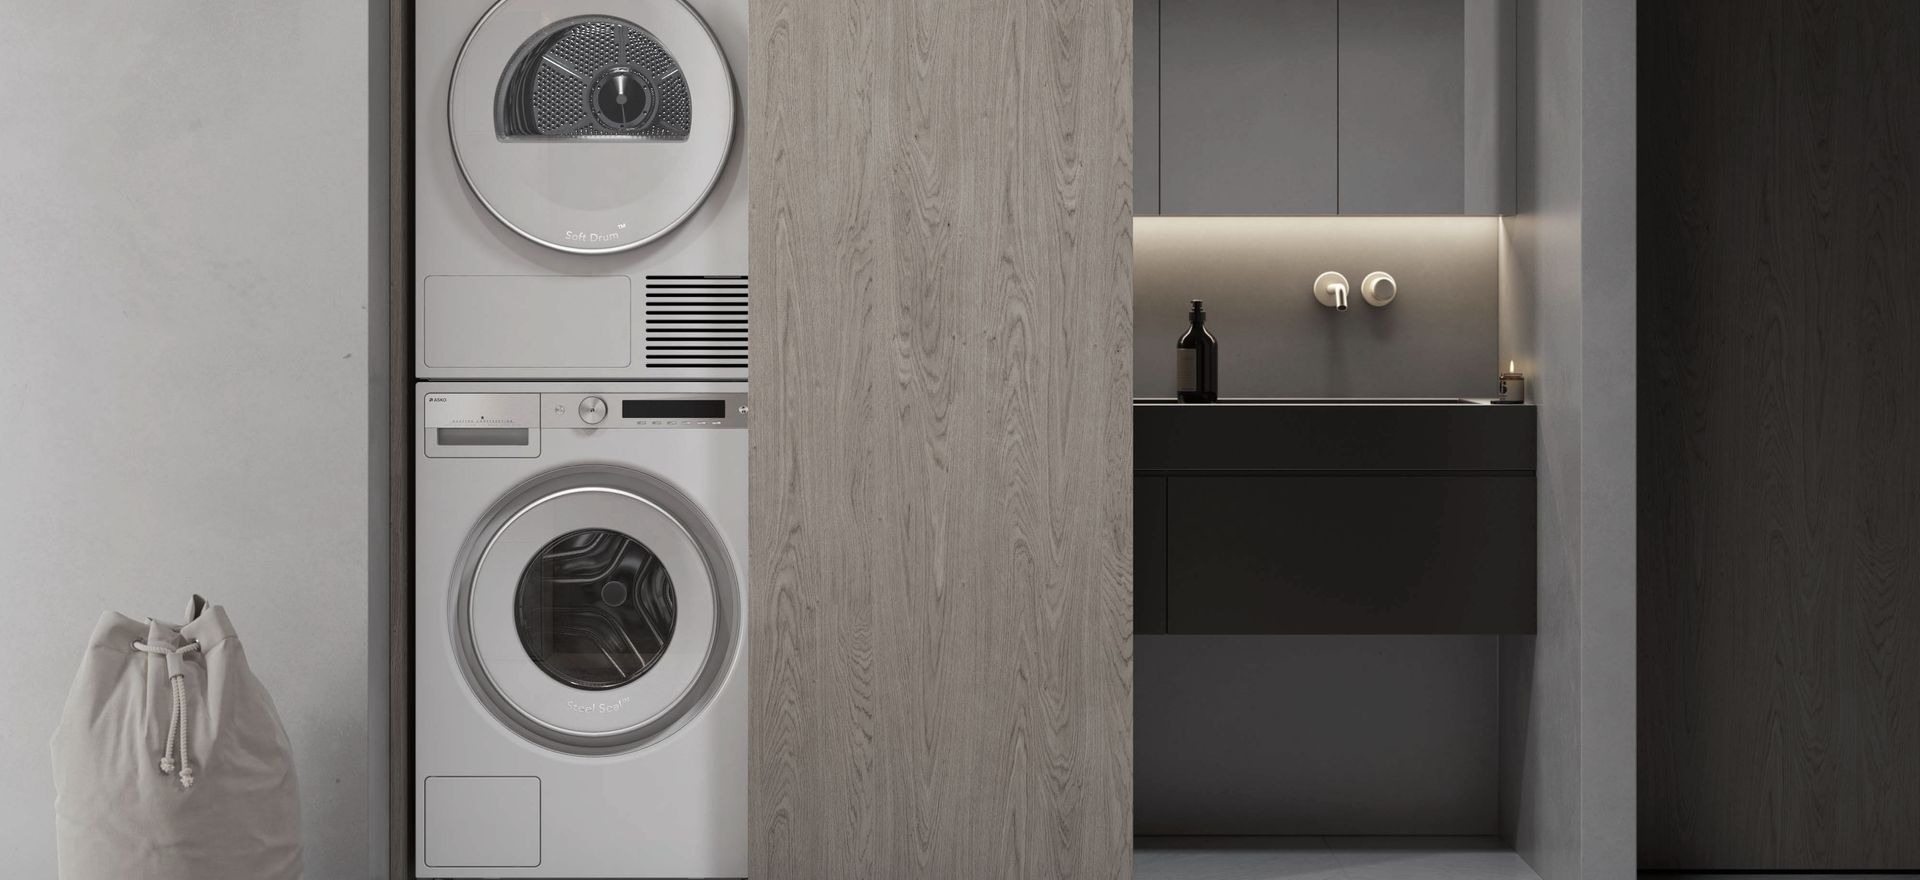 Using Scandinavian principles to create an efficient, low-stress laundry room